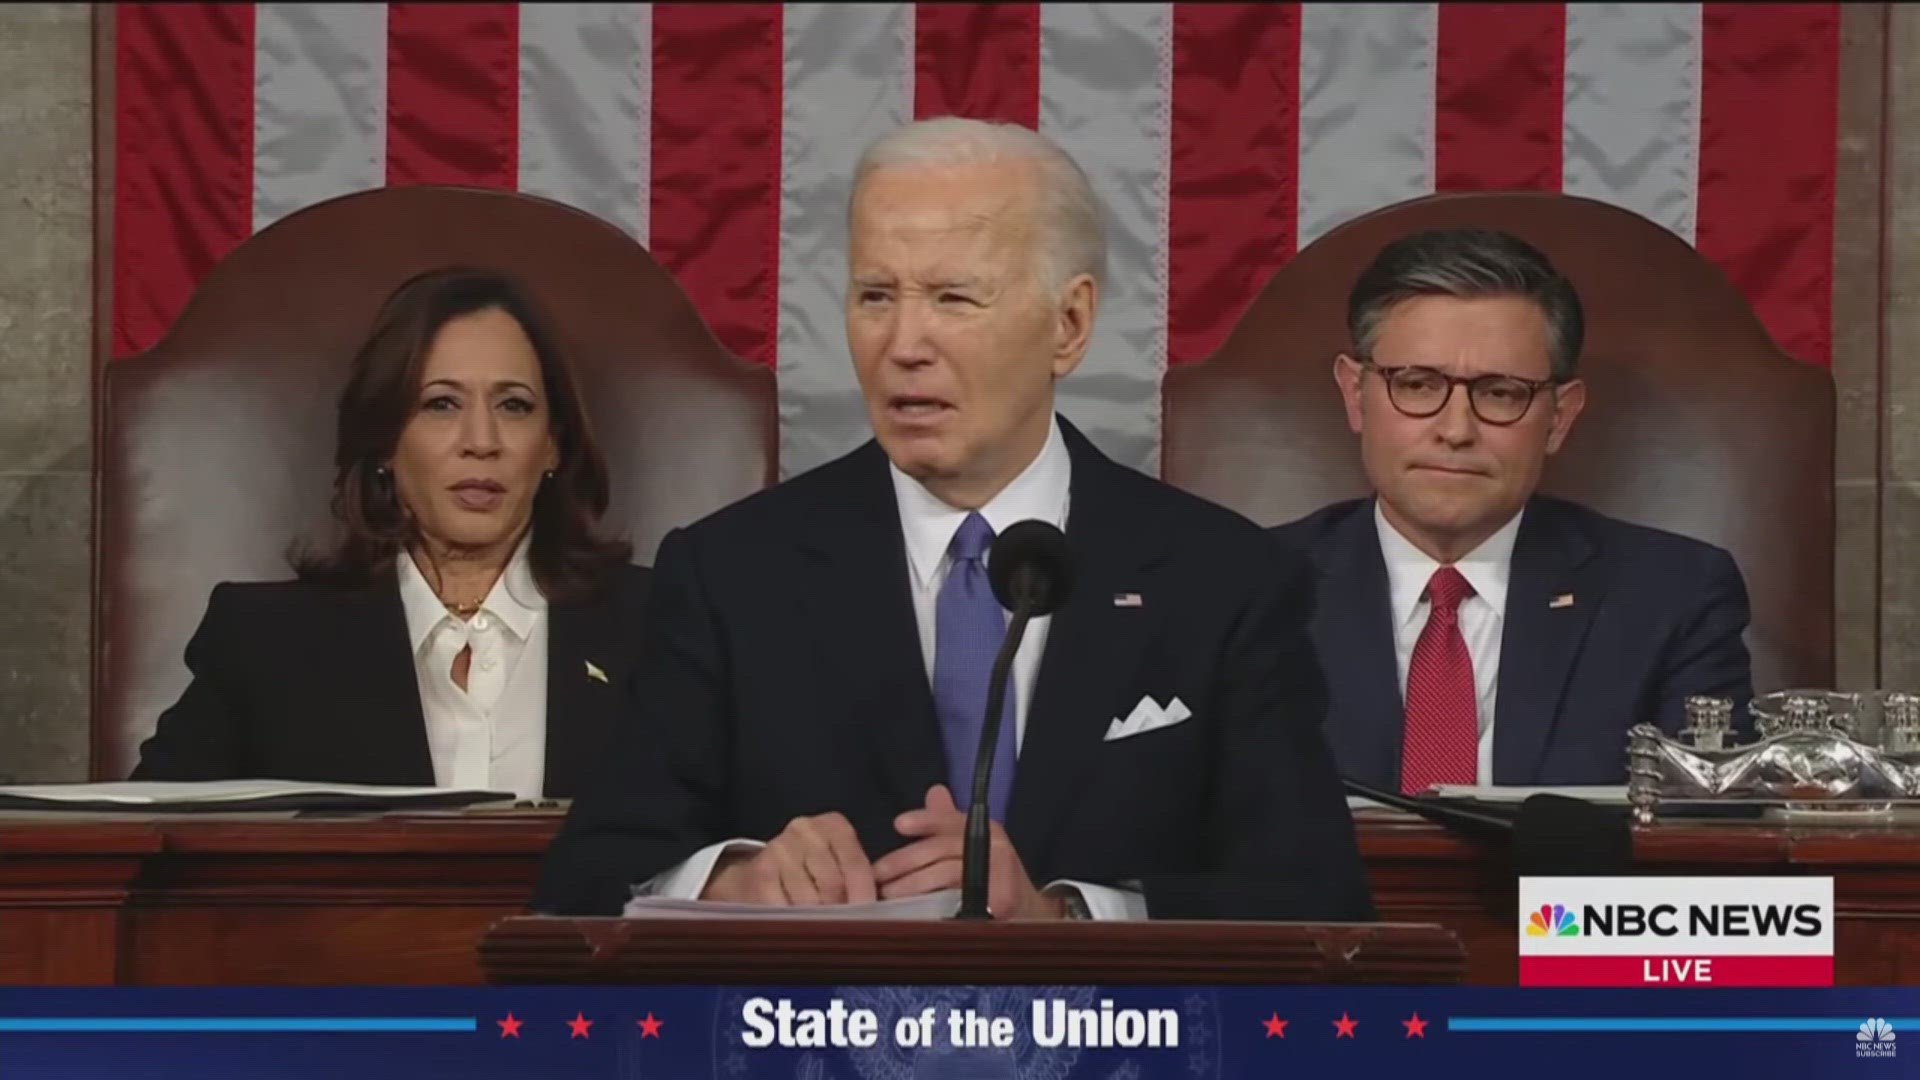 Biden addressed topics ranging from the surging economy, to falling inflation, to the bipartisan effort to help Ukraine fight the Russian invasion.